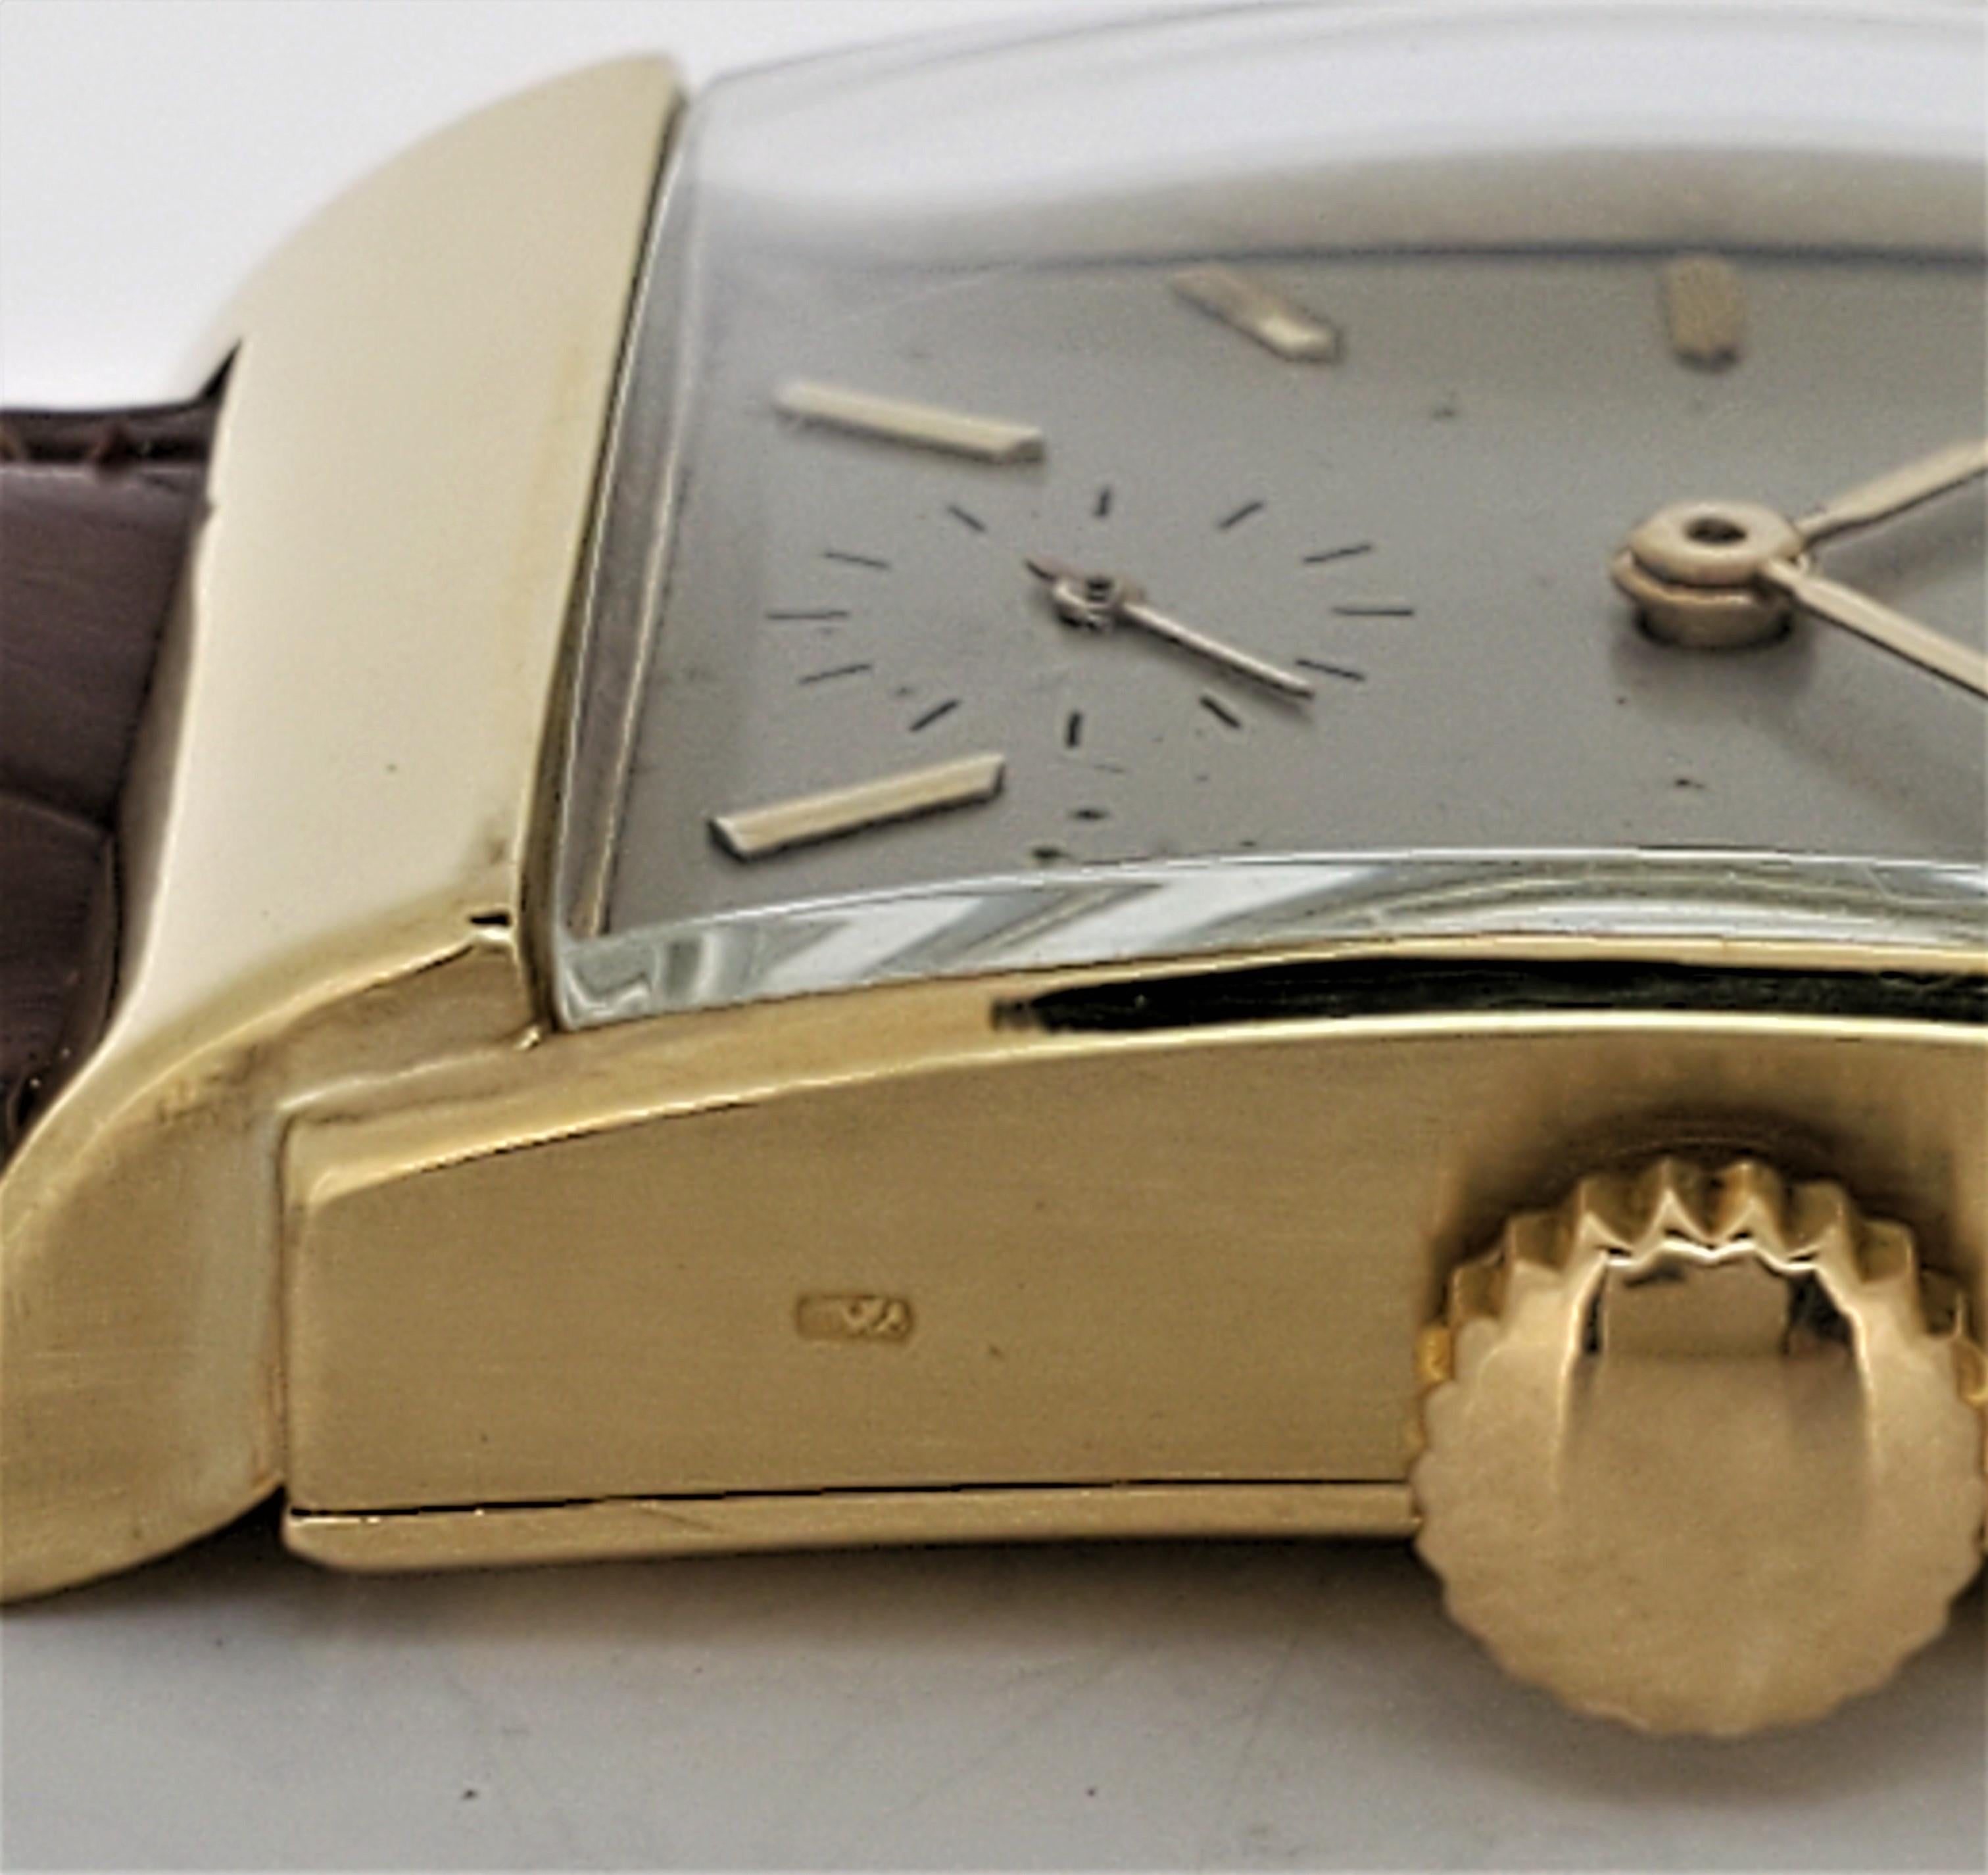 Patek Philippe 2479J Curved Domed Rectangular Watch with Stepped Case Circa 1950 For Sale 3